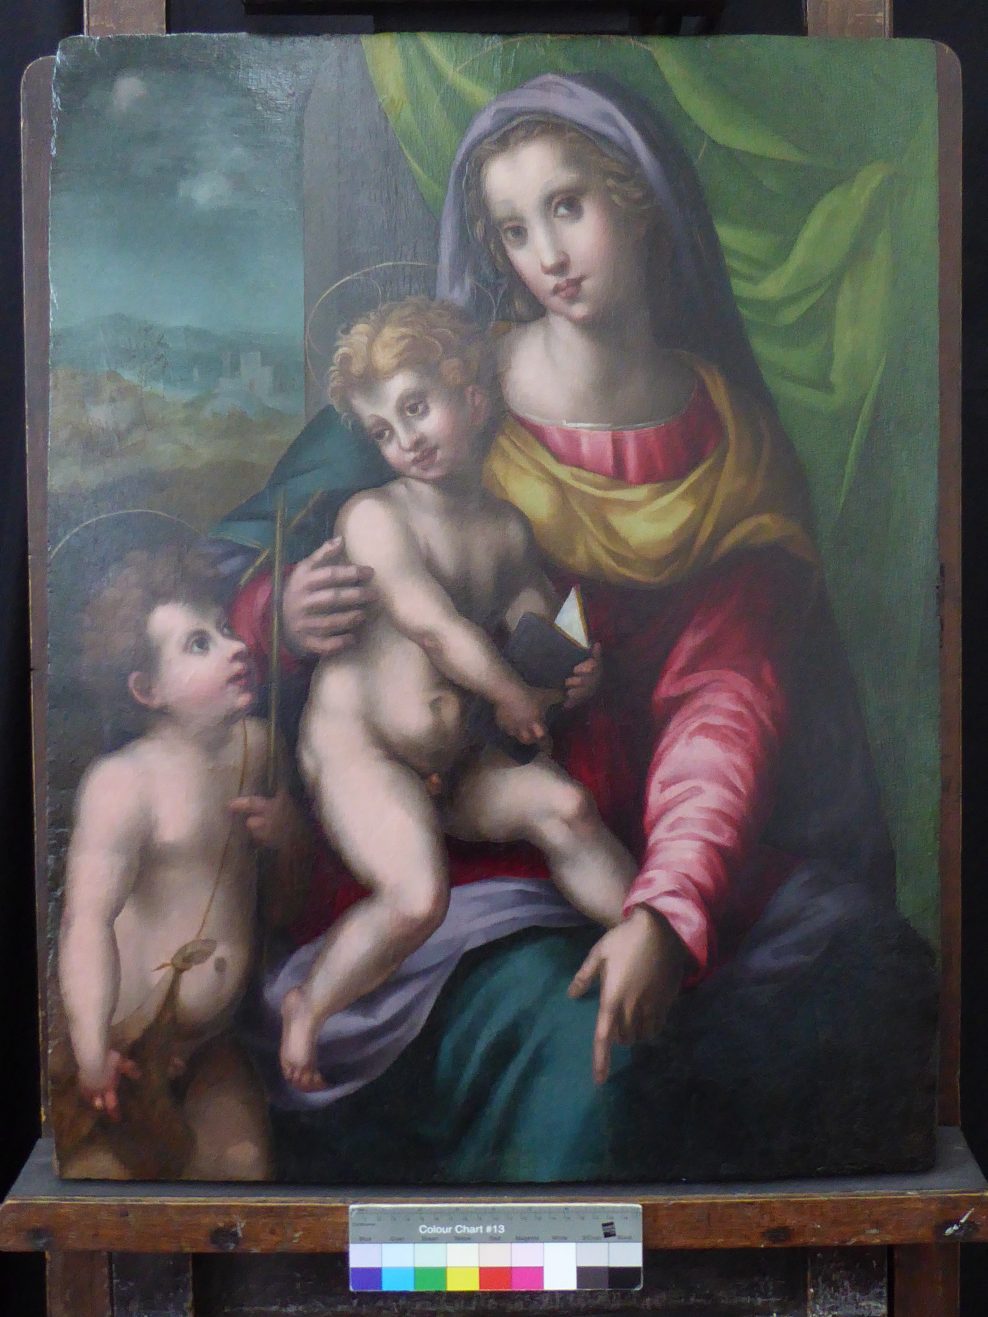 ‘The Madonna and Child, with Infant Saint John’, attributed to a pupil of Domenico Puligo (1492–1527)